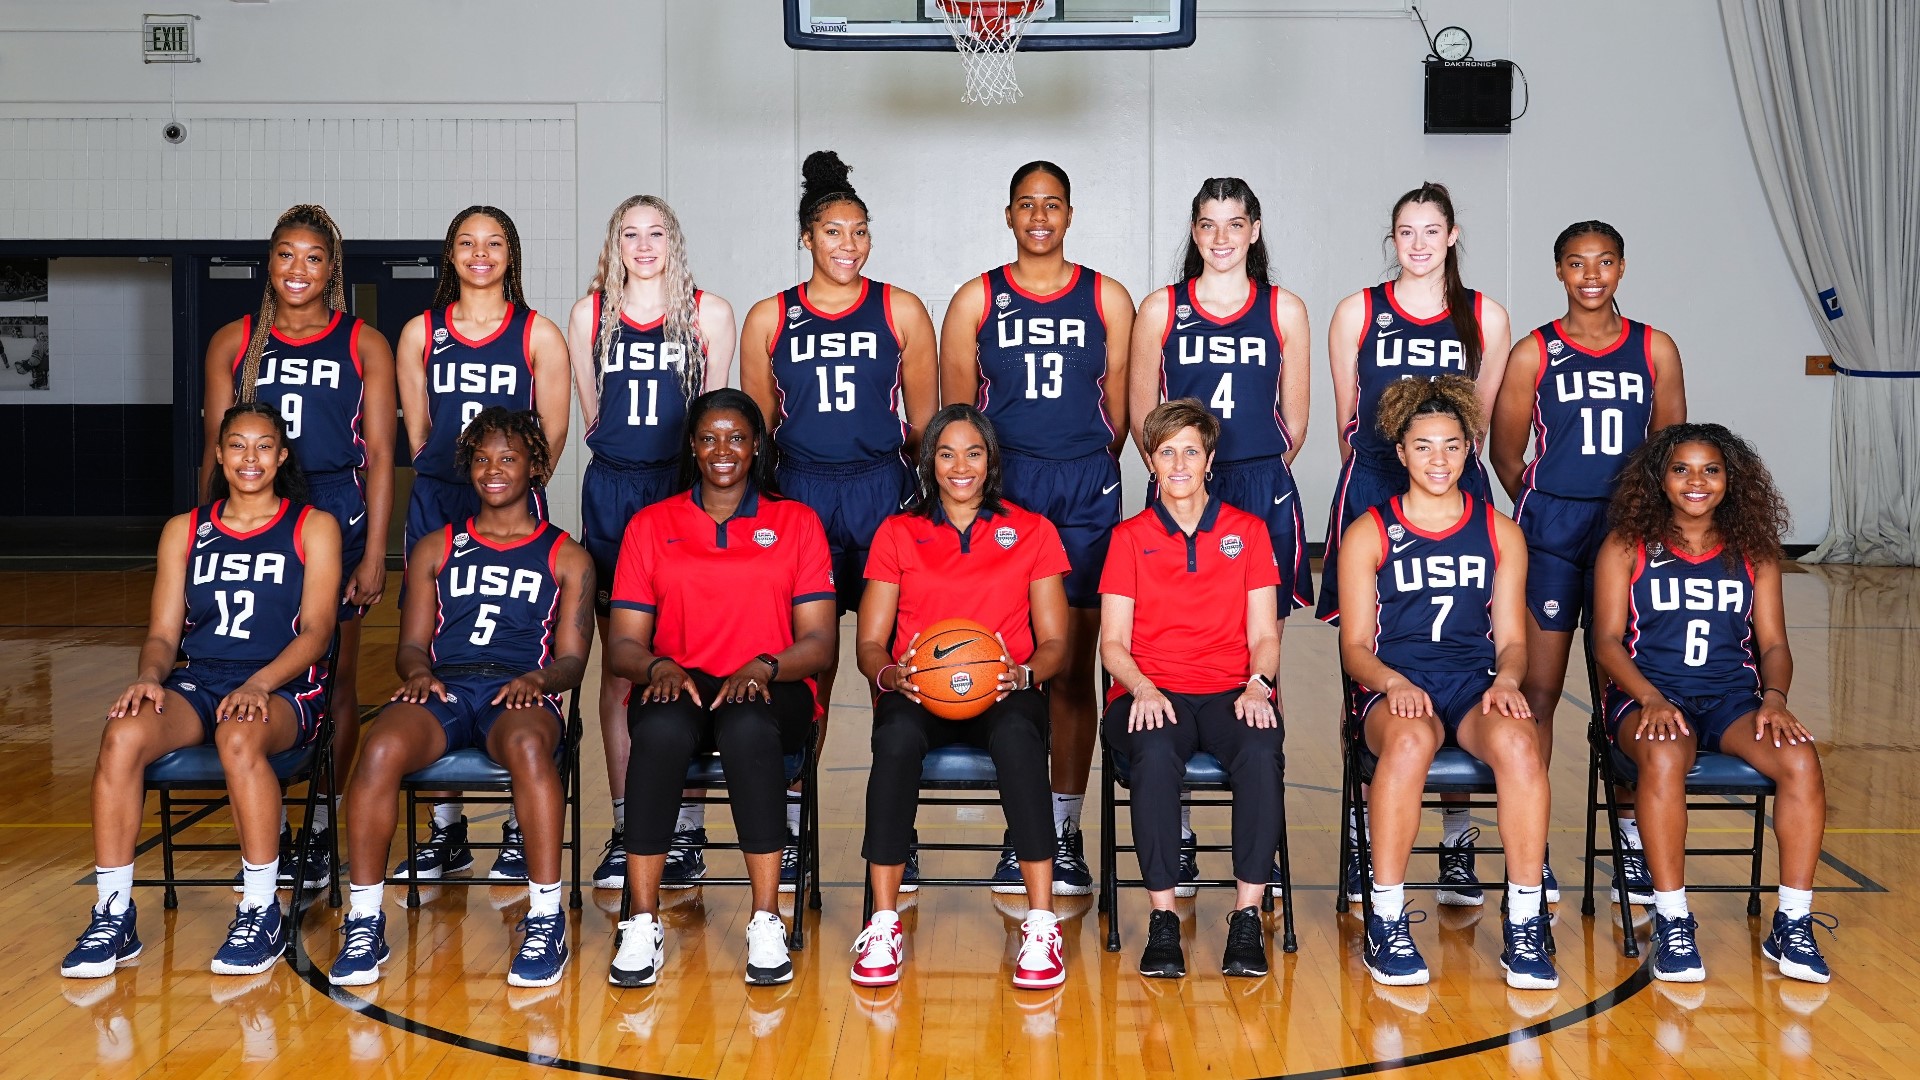 VanSlooten, an Oregon commit, was one of 12 players selected to represent her country on one of the highest stages.